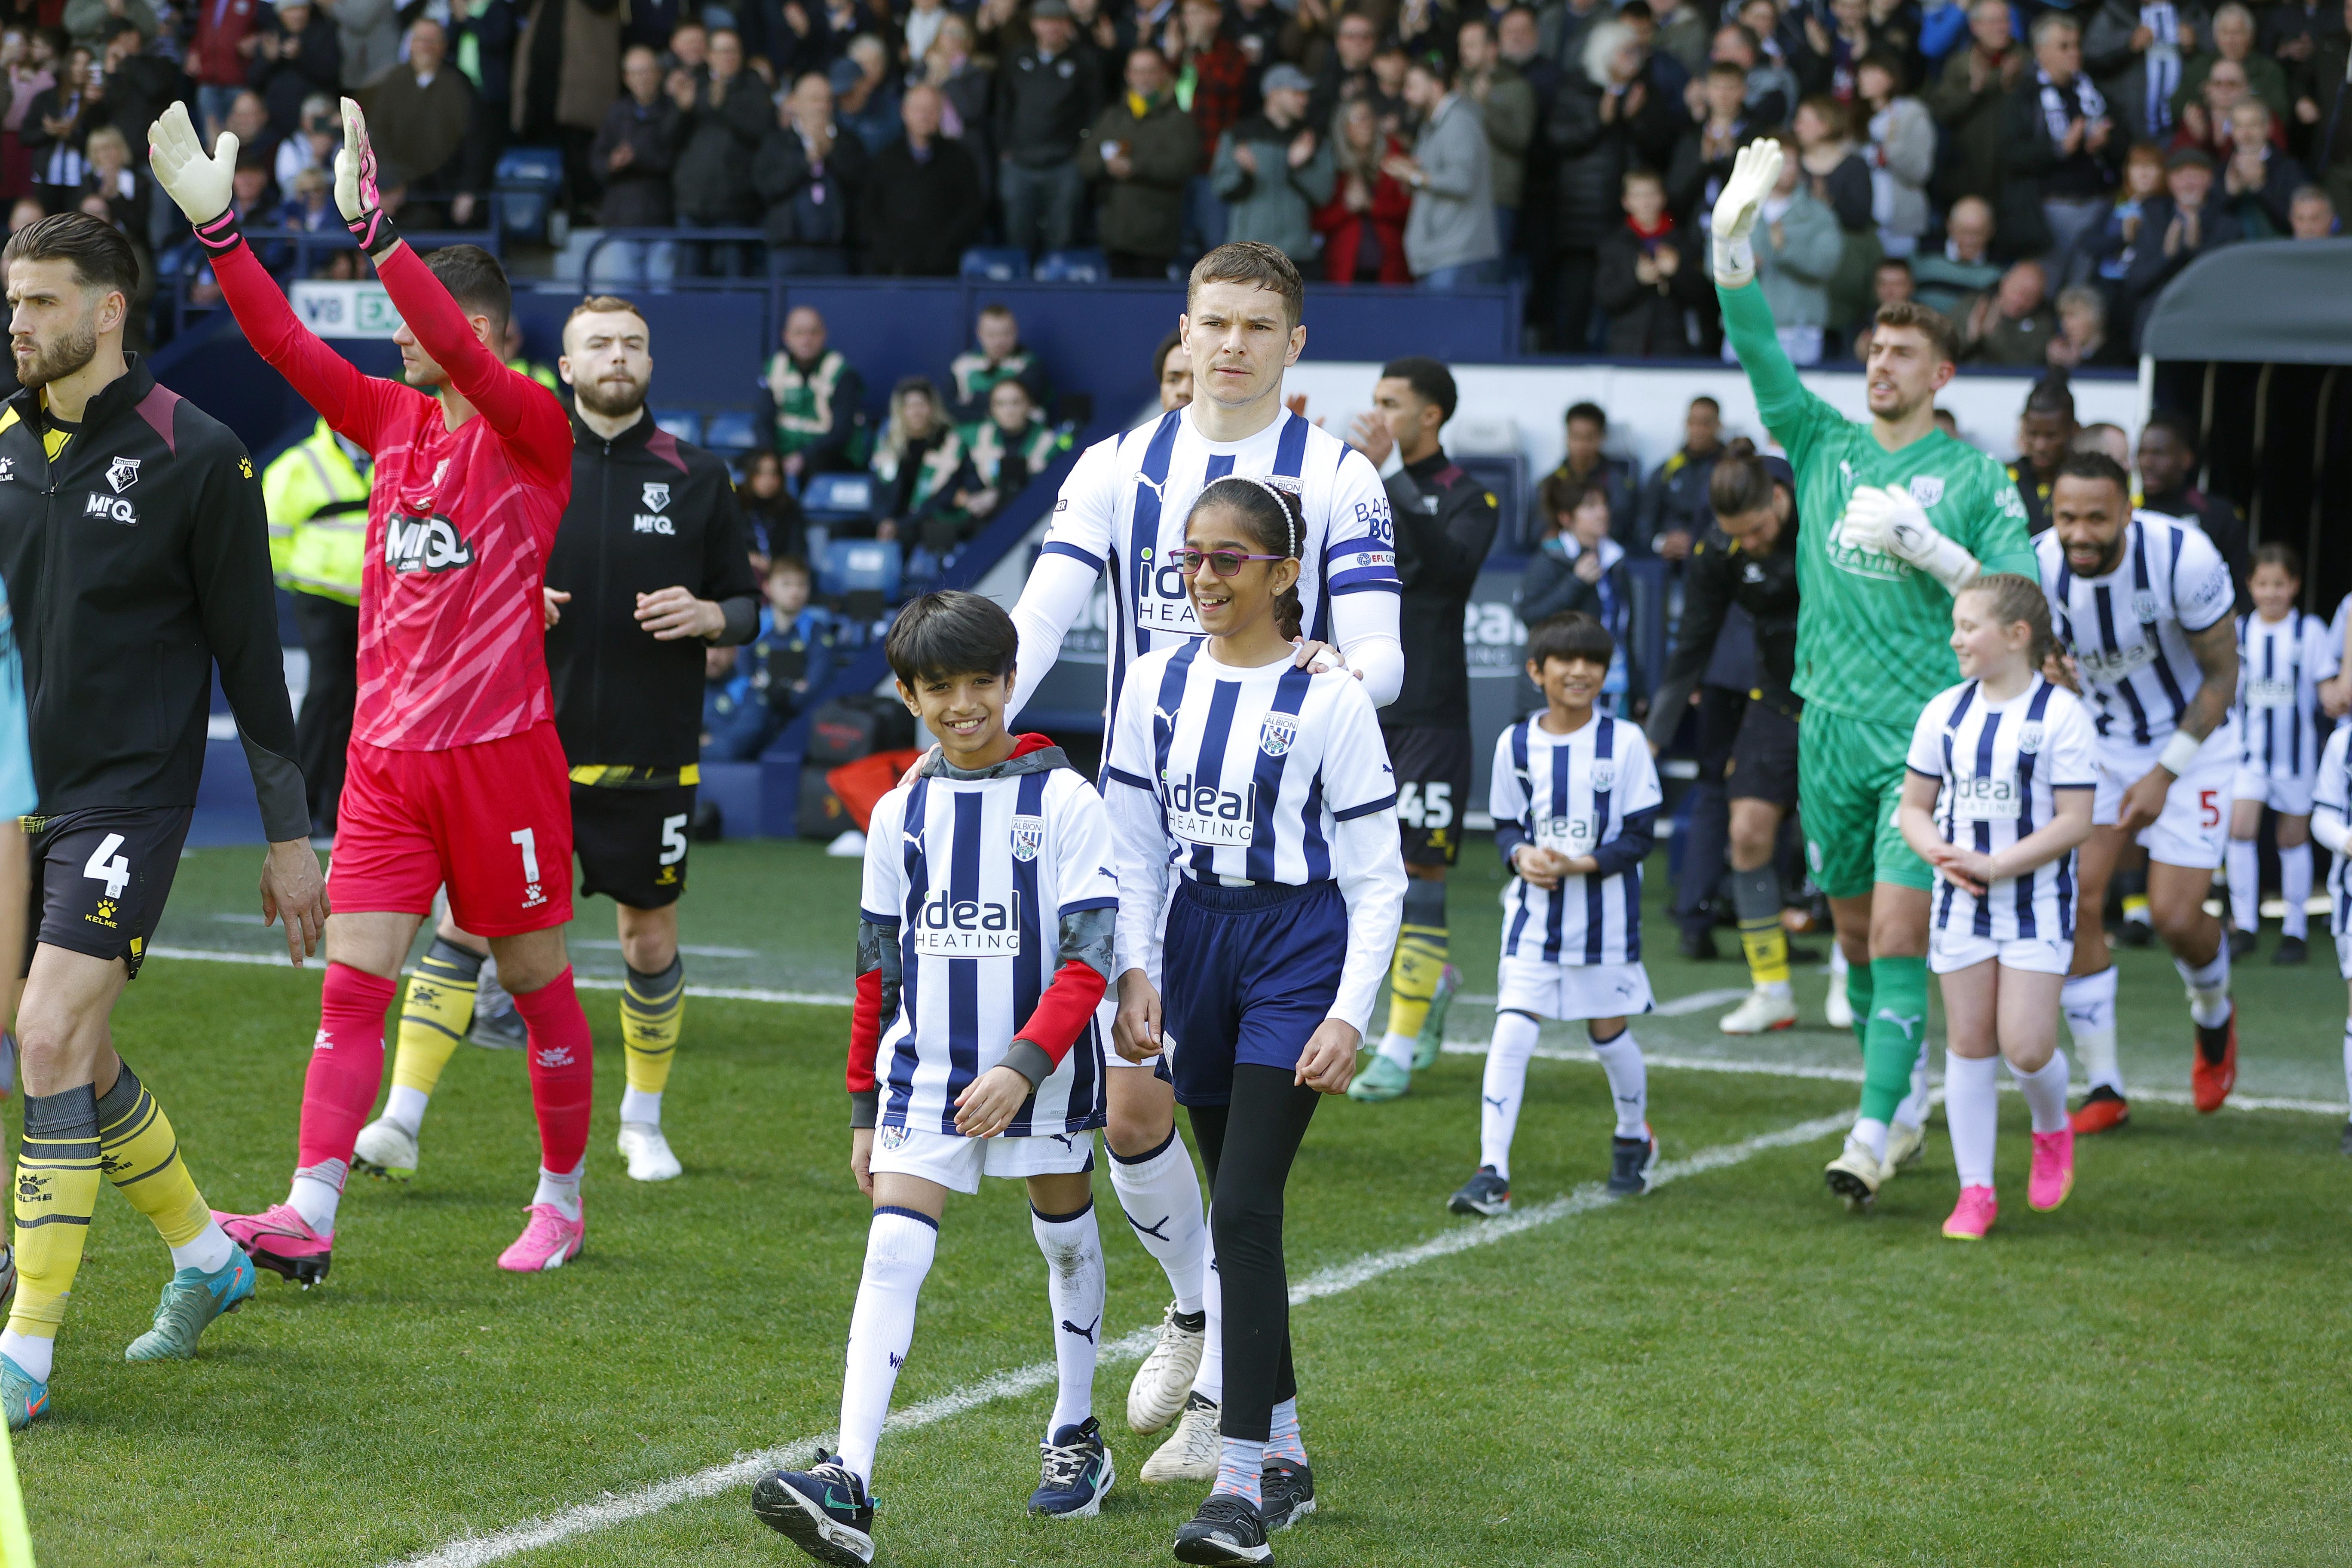 Conor Townsend leads Albion out at The Hawthorns against Watford with two mascots